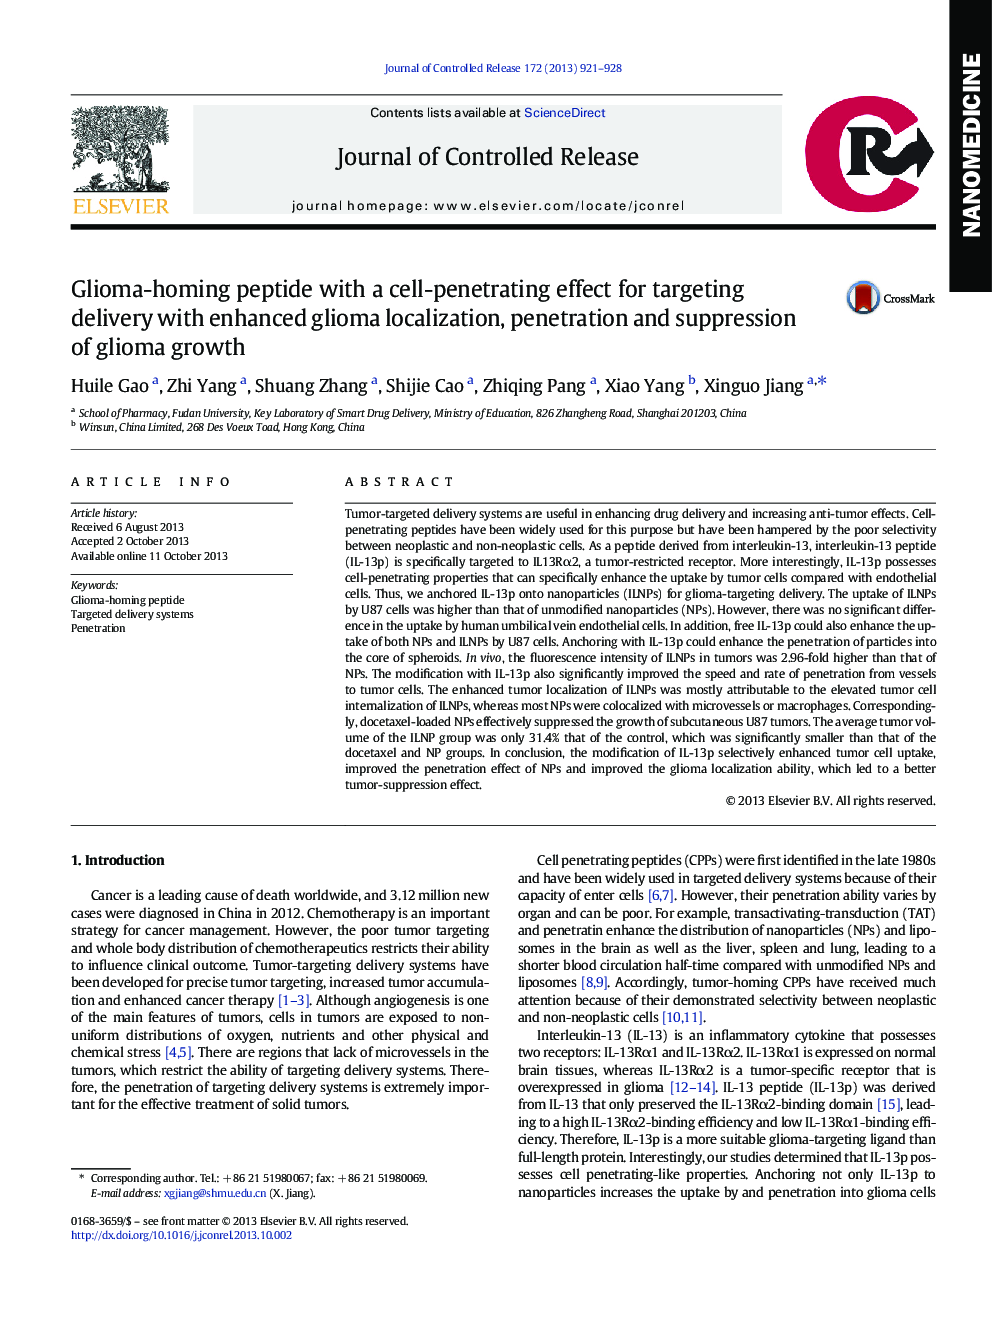 Glioma-homing peptide with a cell-penetrating effect for targeting delivery with enhanced glioma localization, penetration and suppression of glioma growth